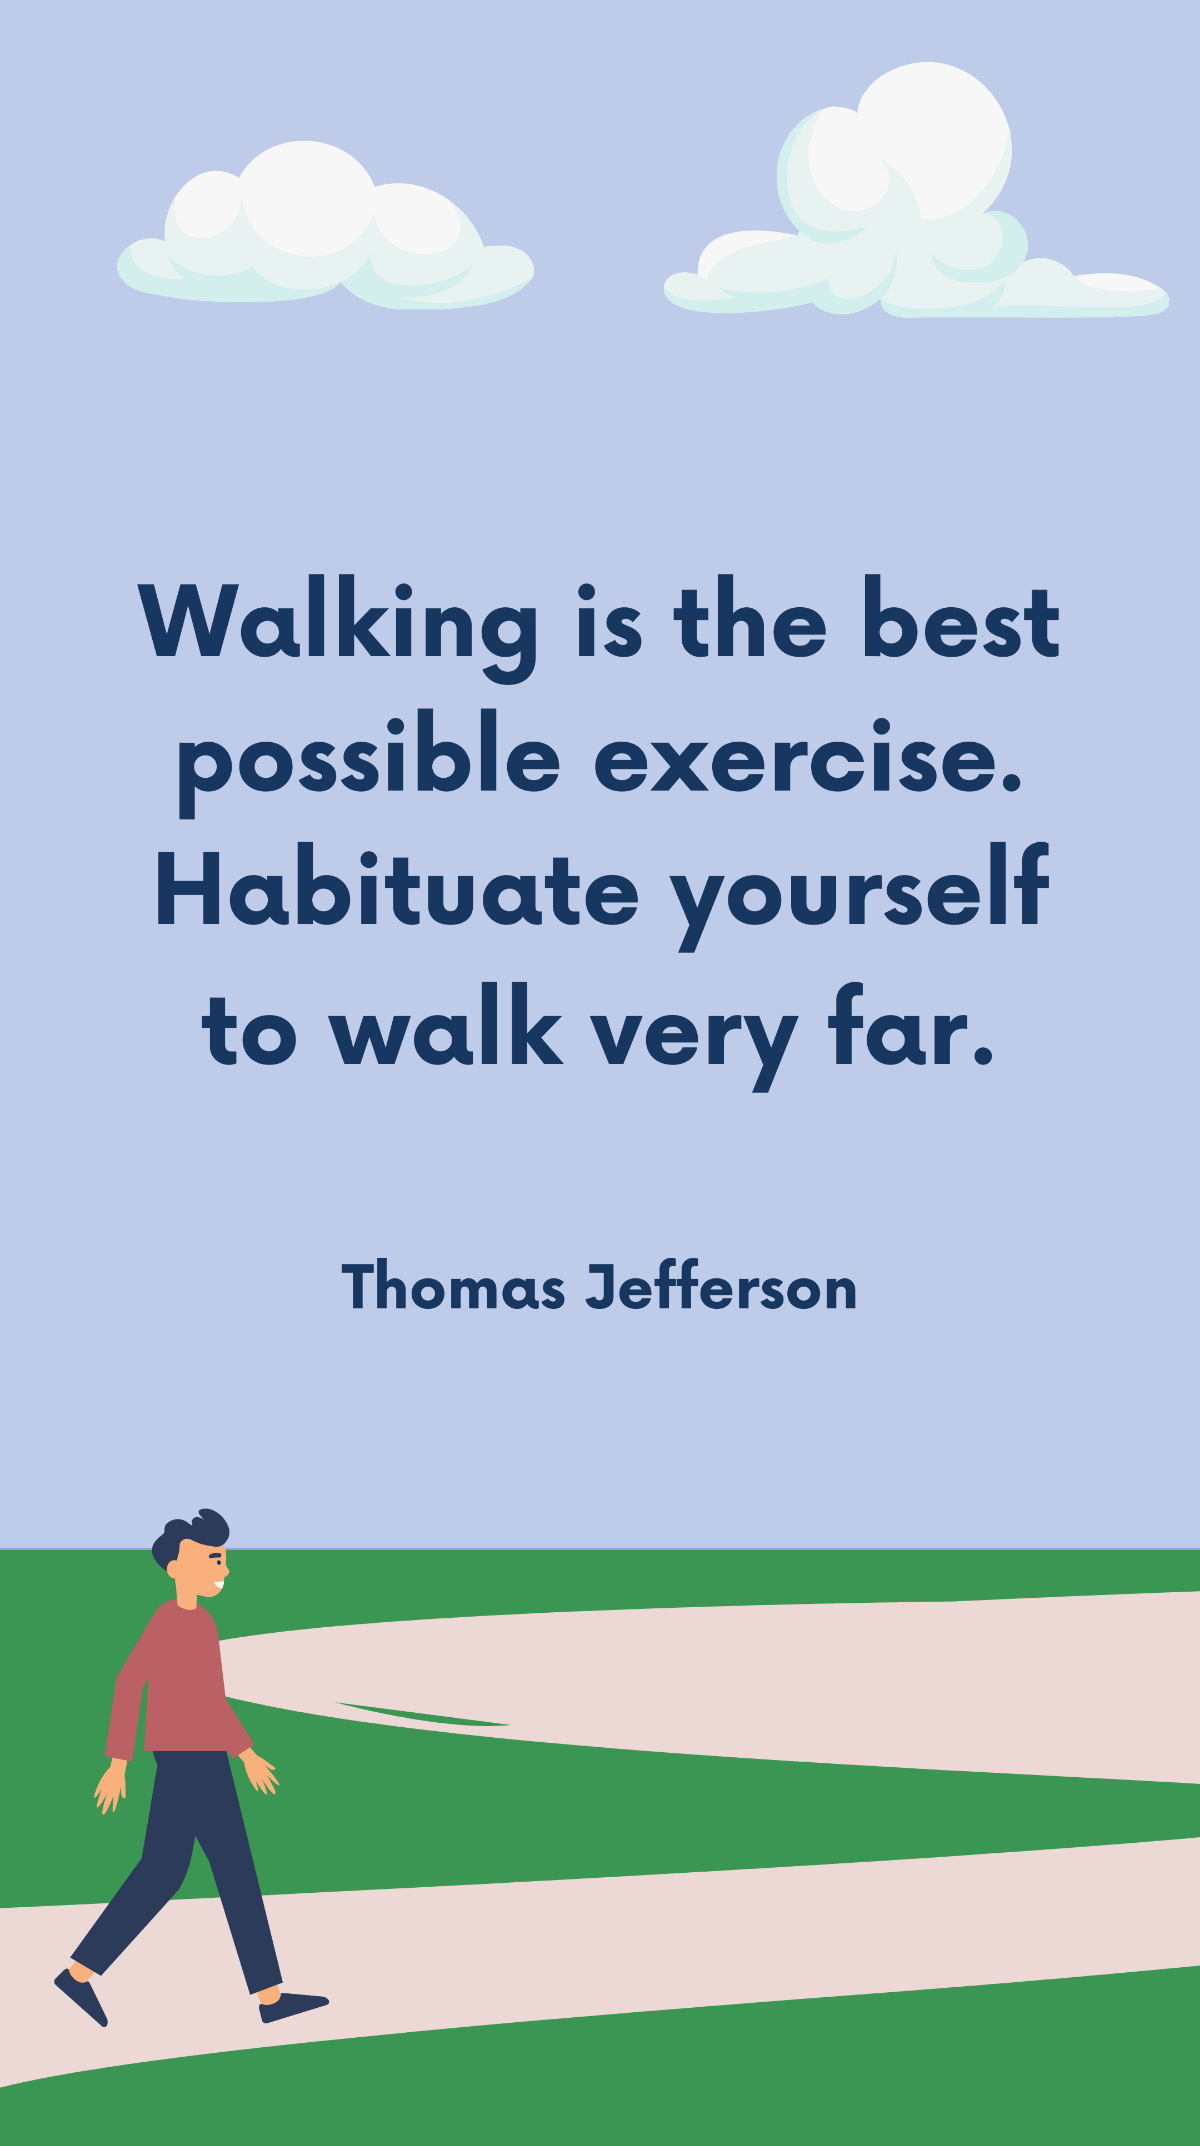 Thomas Jefferson - Walking is the best possible exercise. Habituate yourself to walk very far. Template